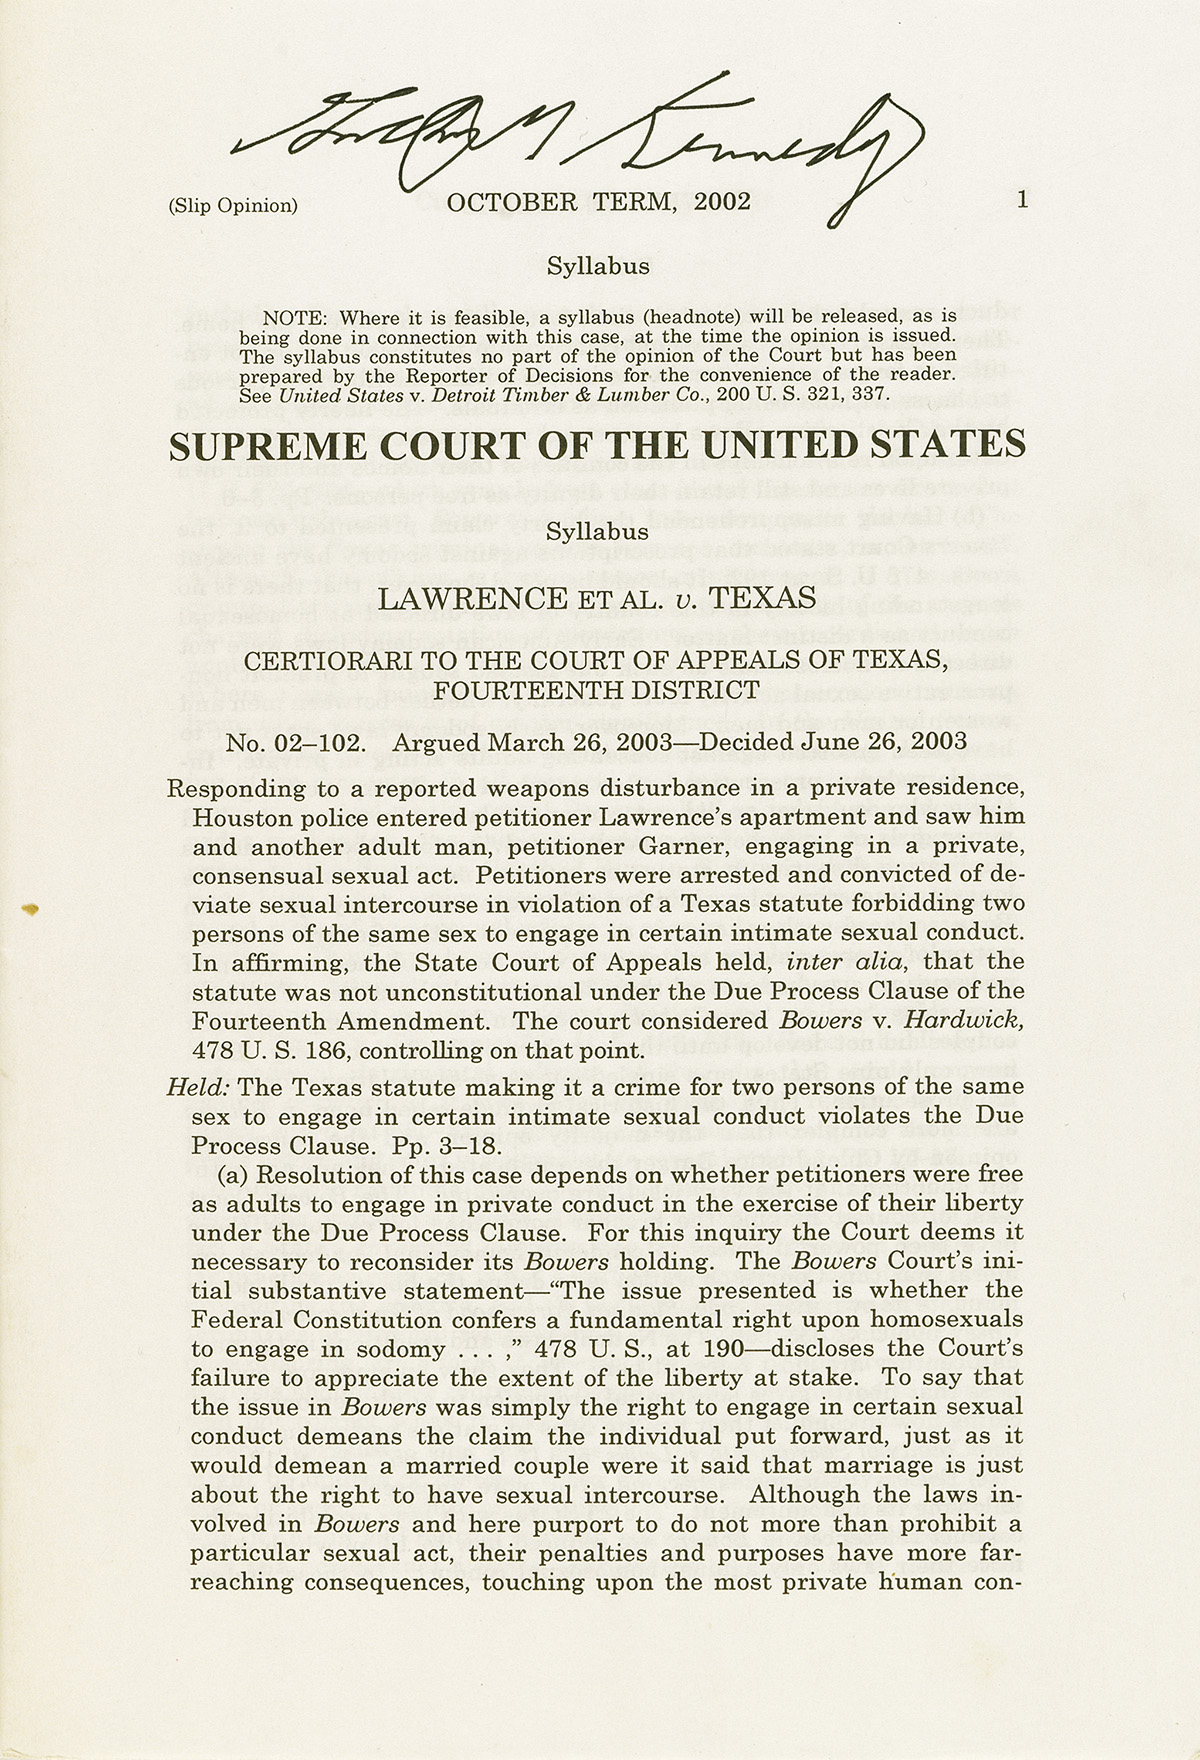 SUPREME COURT OF THE UNITED STATES; Anthony Kennedy.  Lawrence et al v. Texas. Slip opinion.